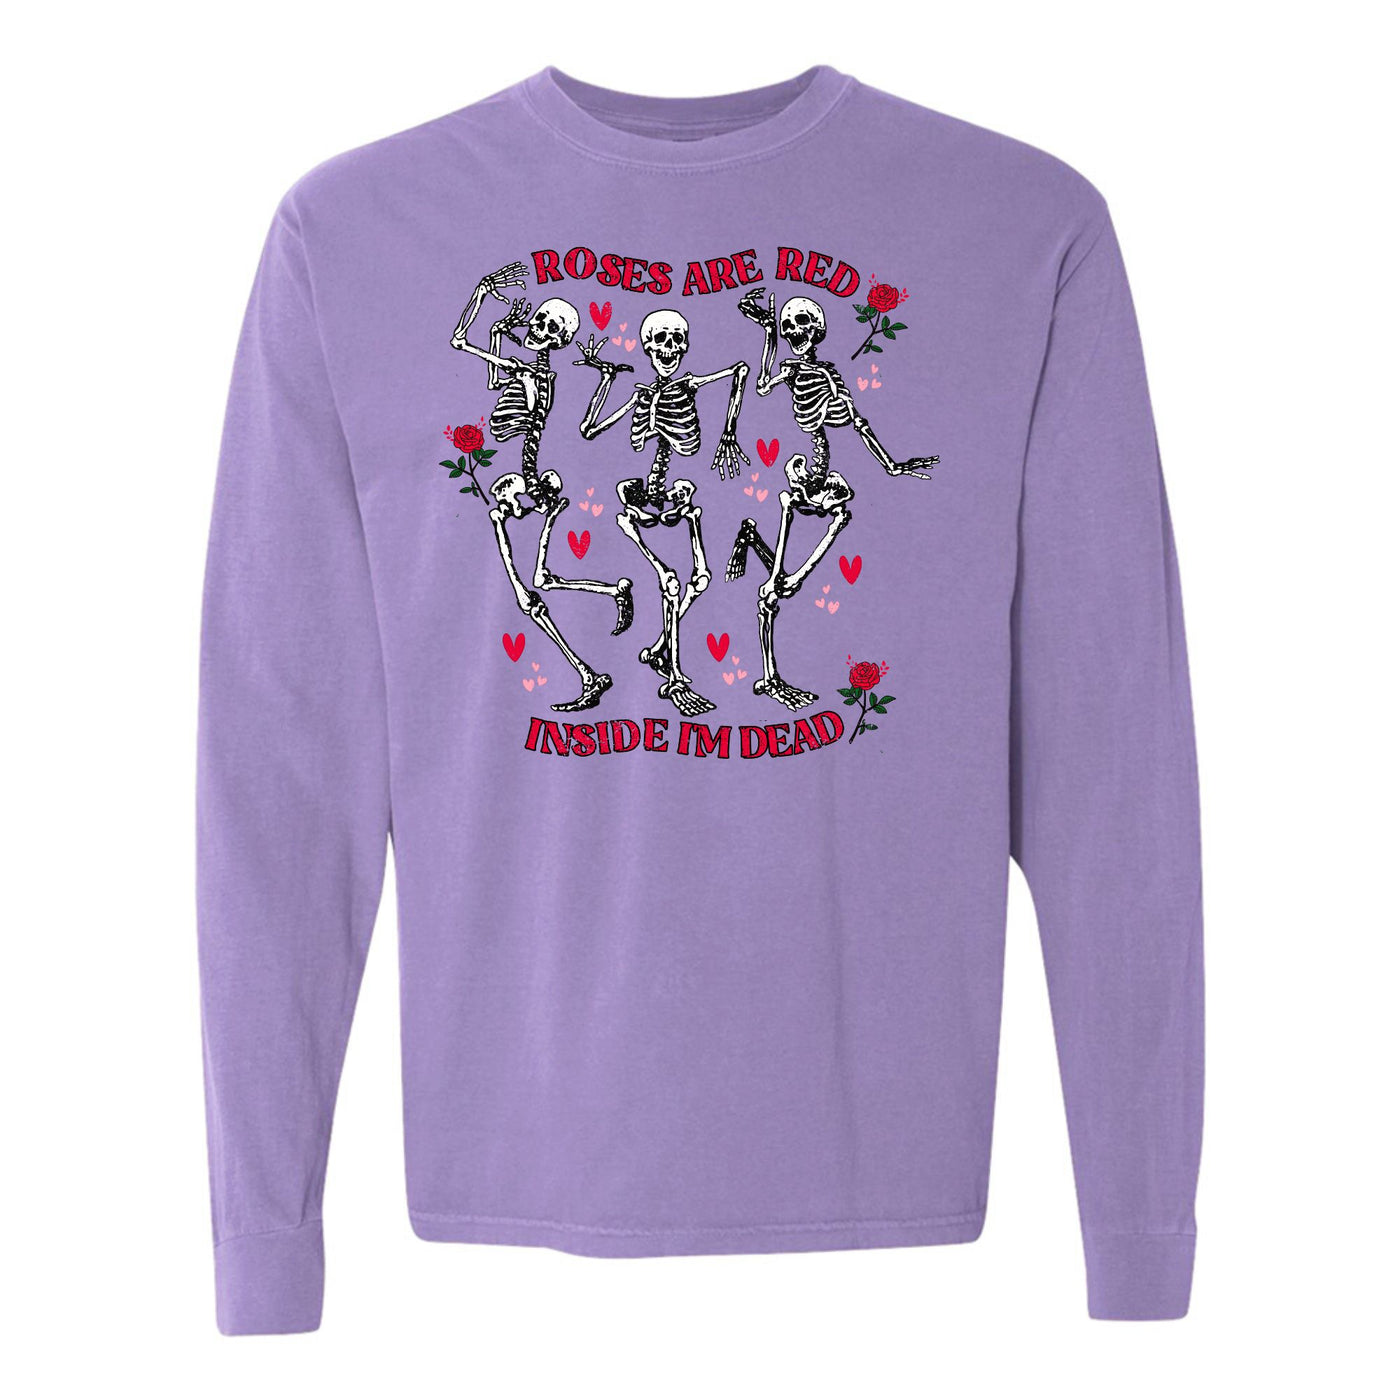 'Roses Are Red, Inside I'm Dead' Long Sleeve T-Shirt